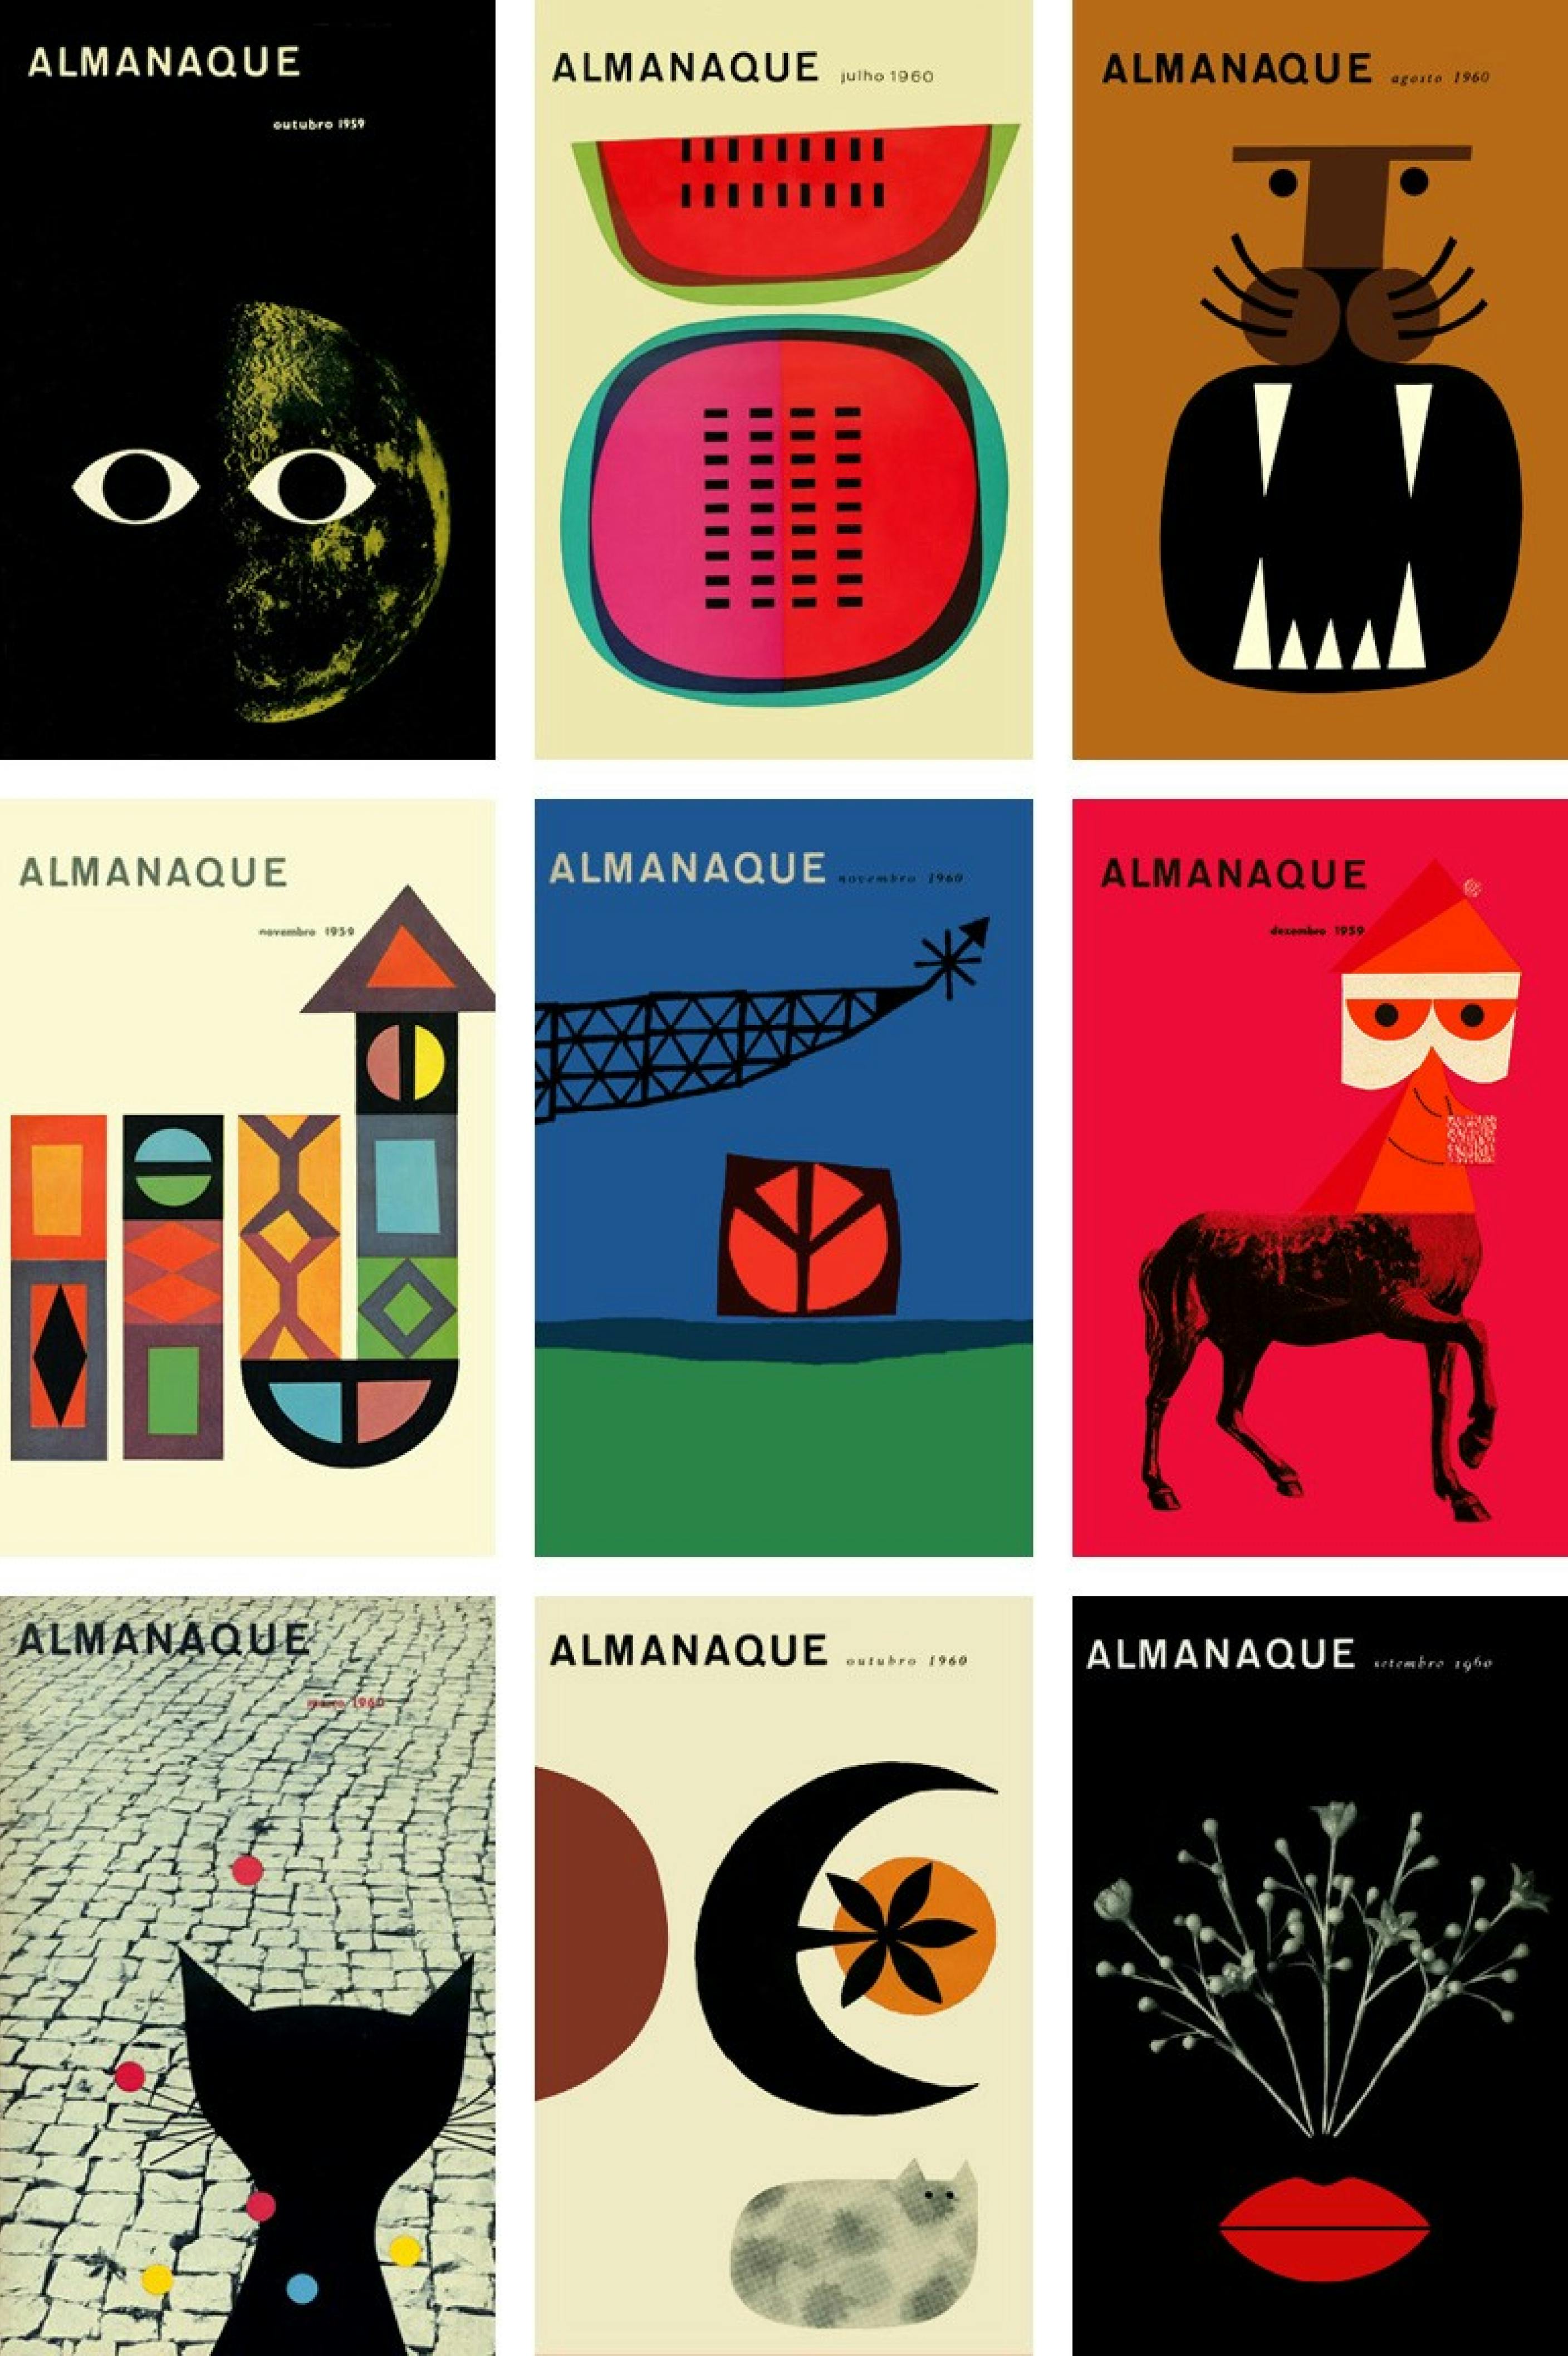 Nine covers of the Almanaque magazine designed by Sebastiao Rodrigues